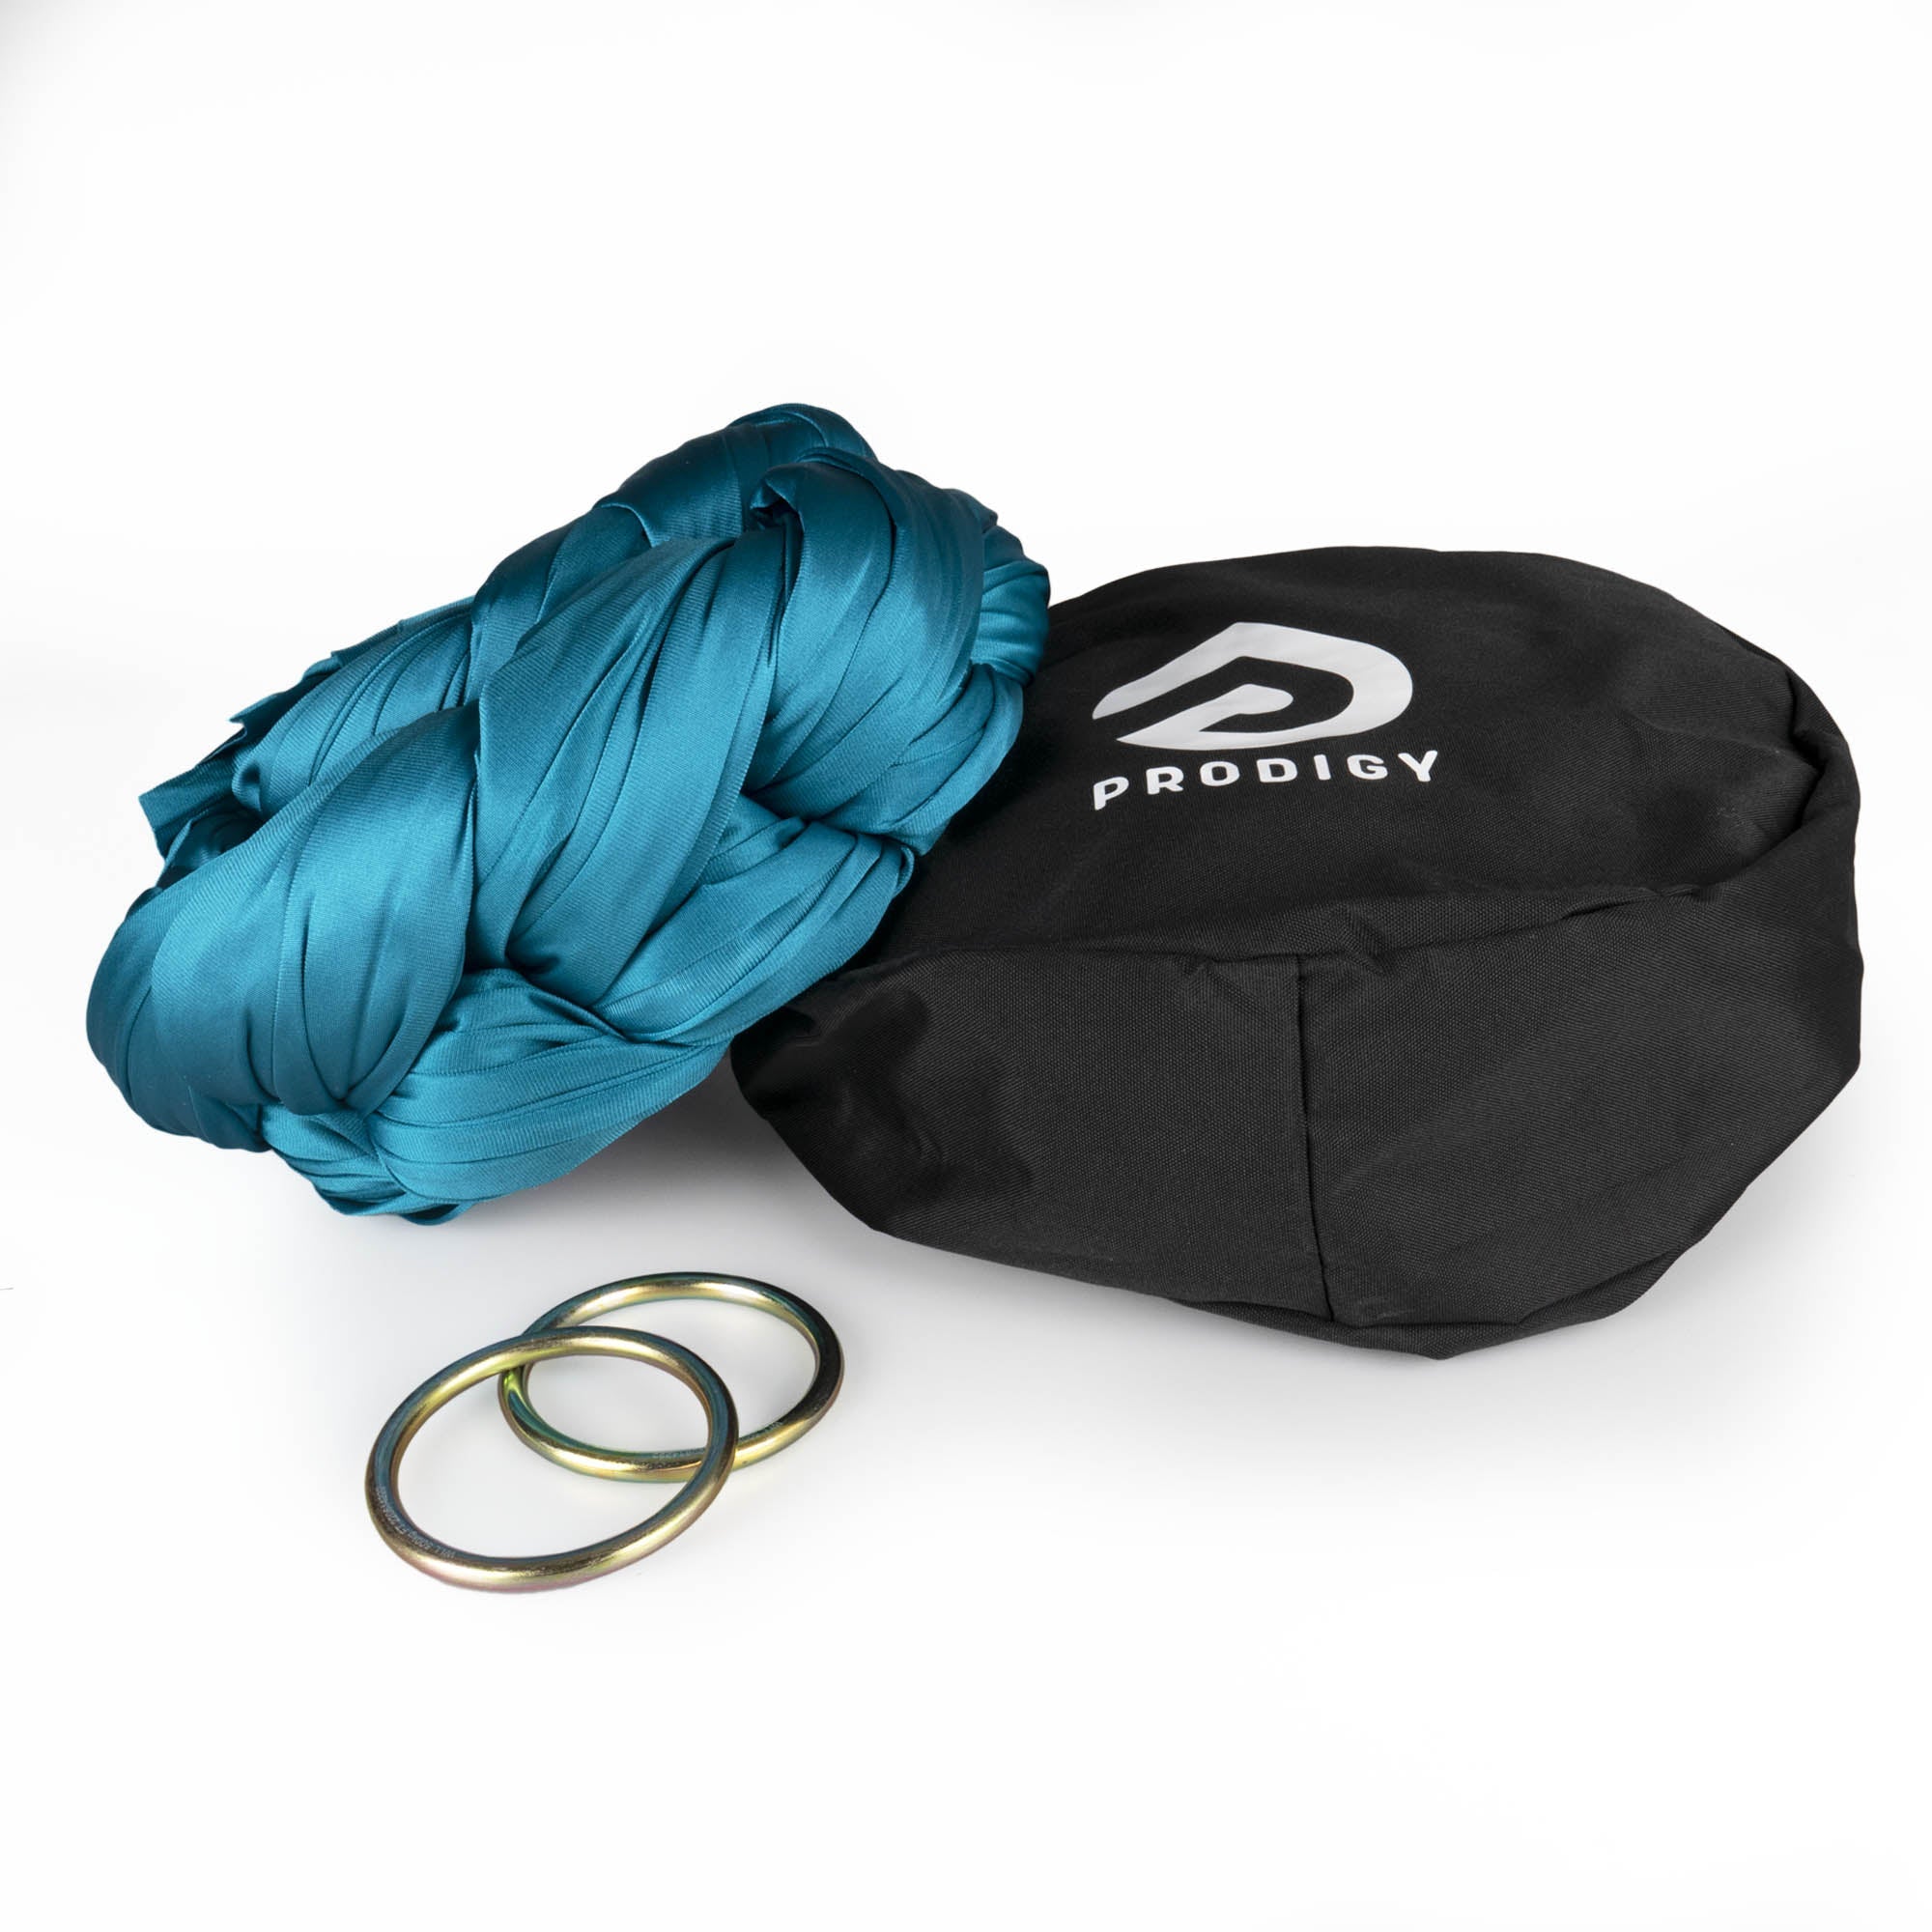 Prodigy aerial sling and O rings and bag - pine green sling resting on hammock bag